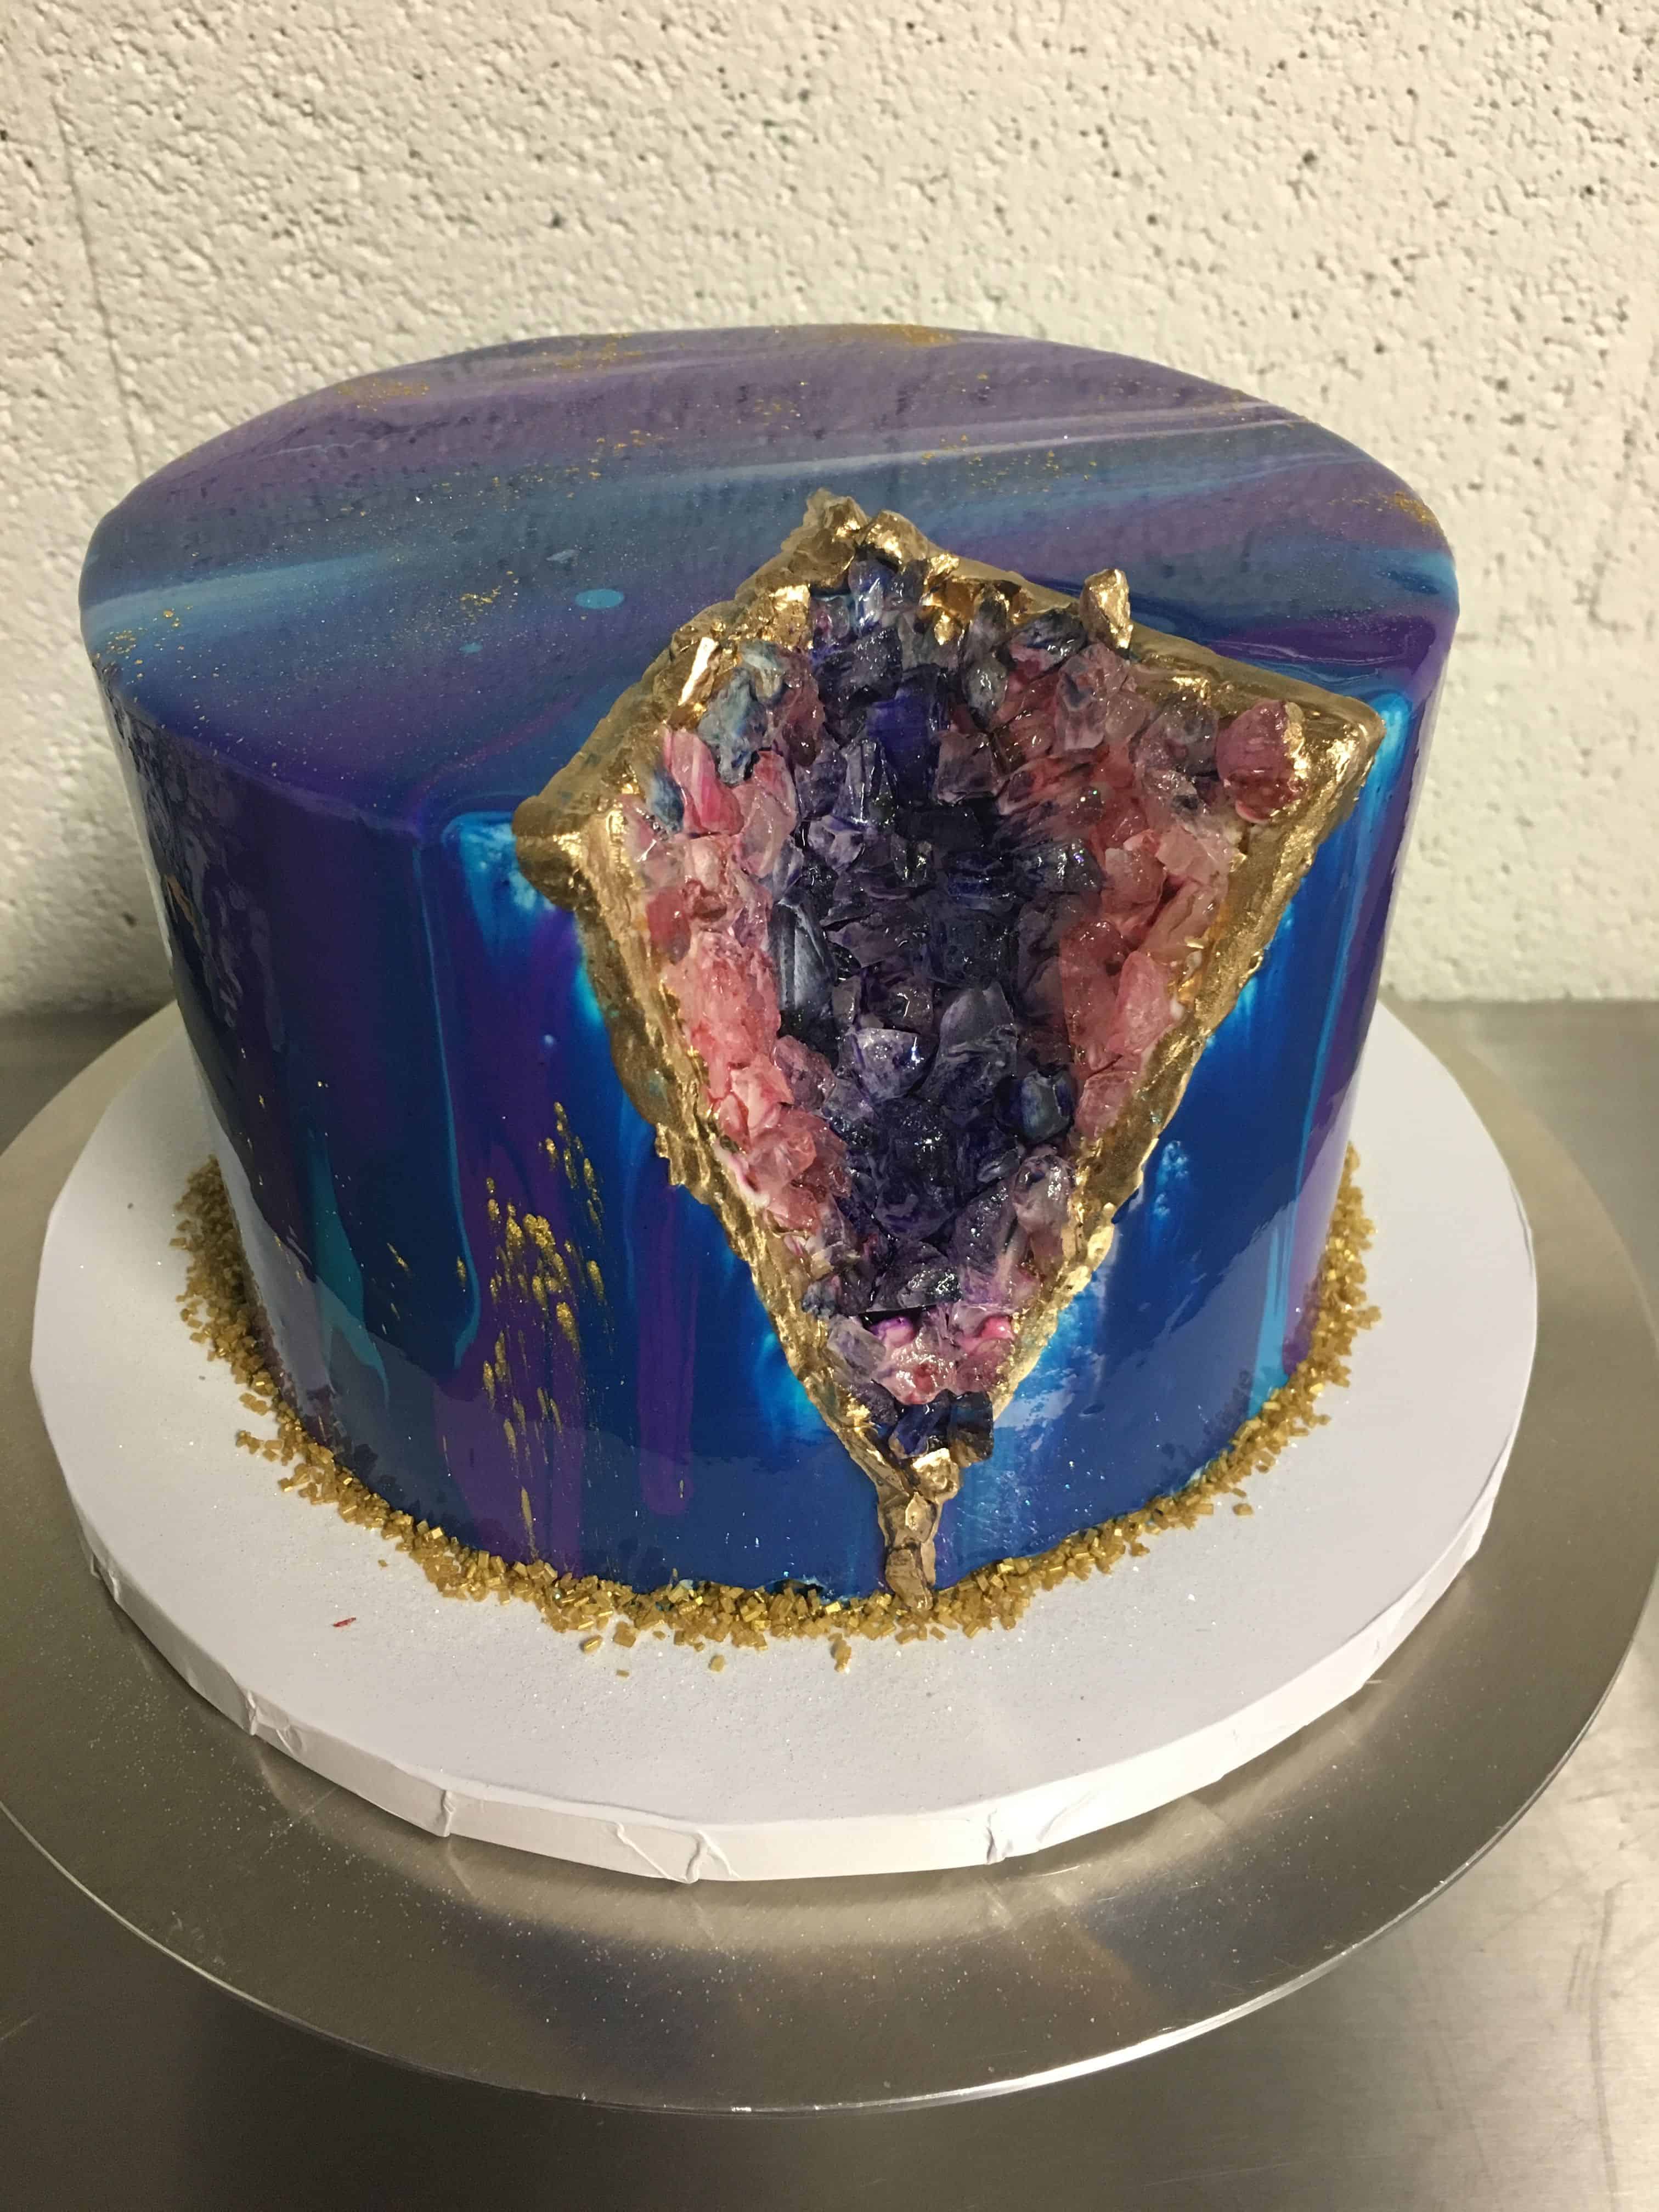 Mirror glaze cake with gold, pink, and blue geode